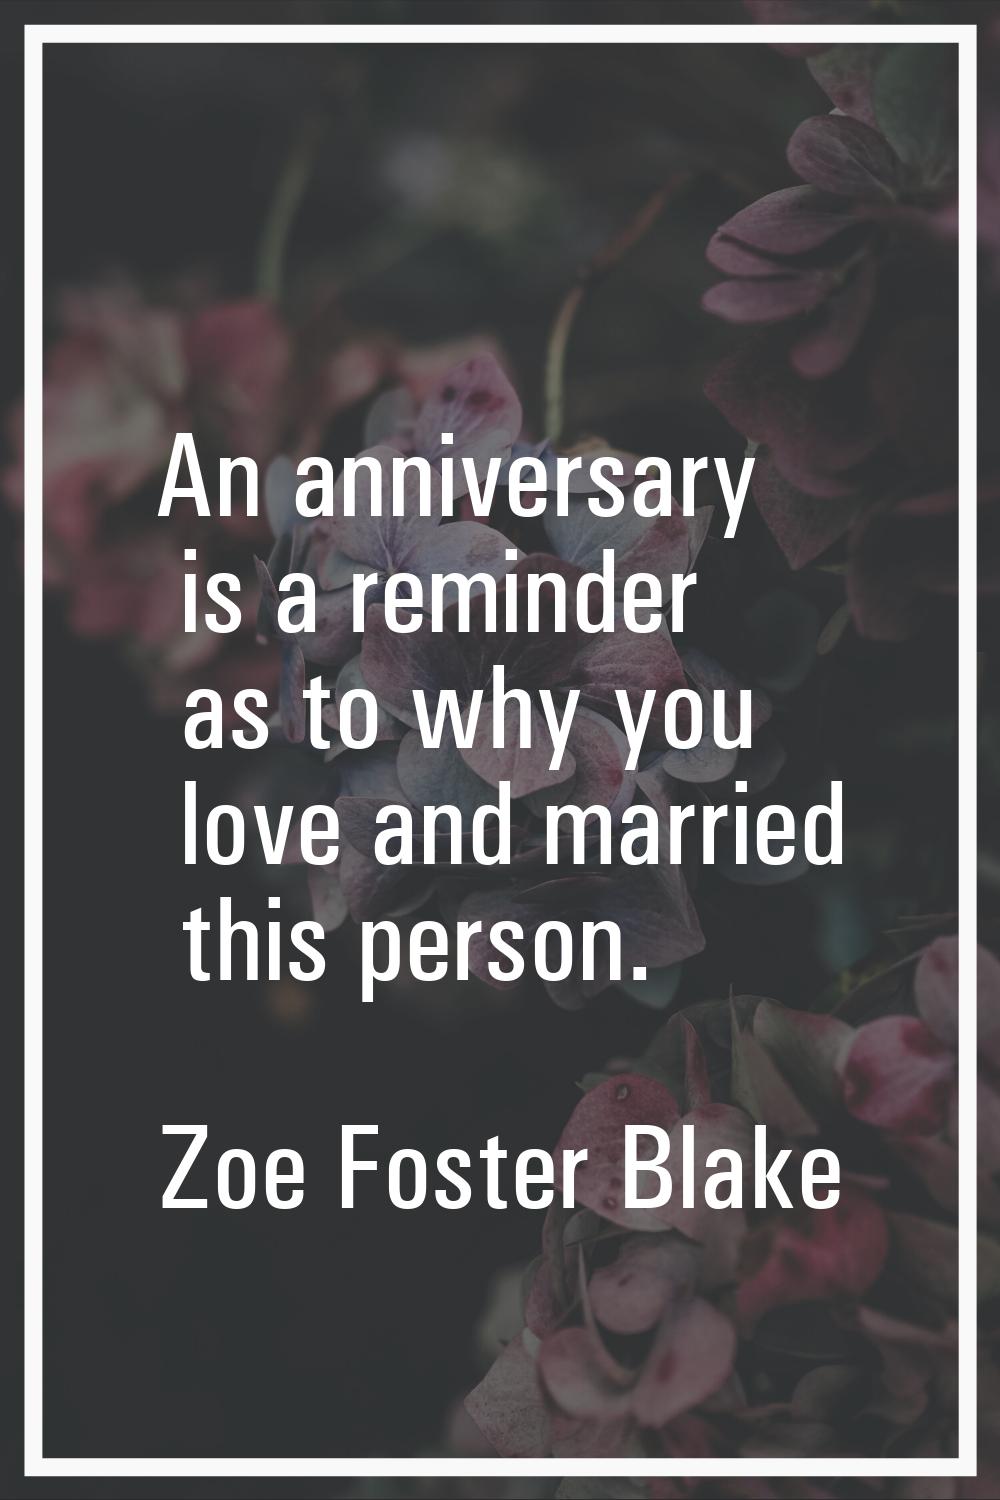 An anniversary is a reminder as to why you love and married this person.